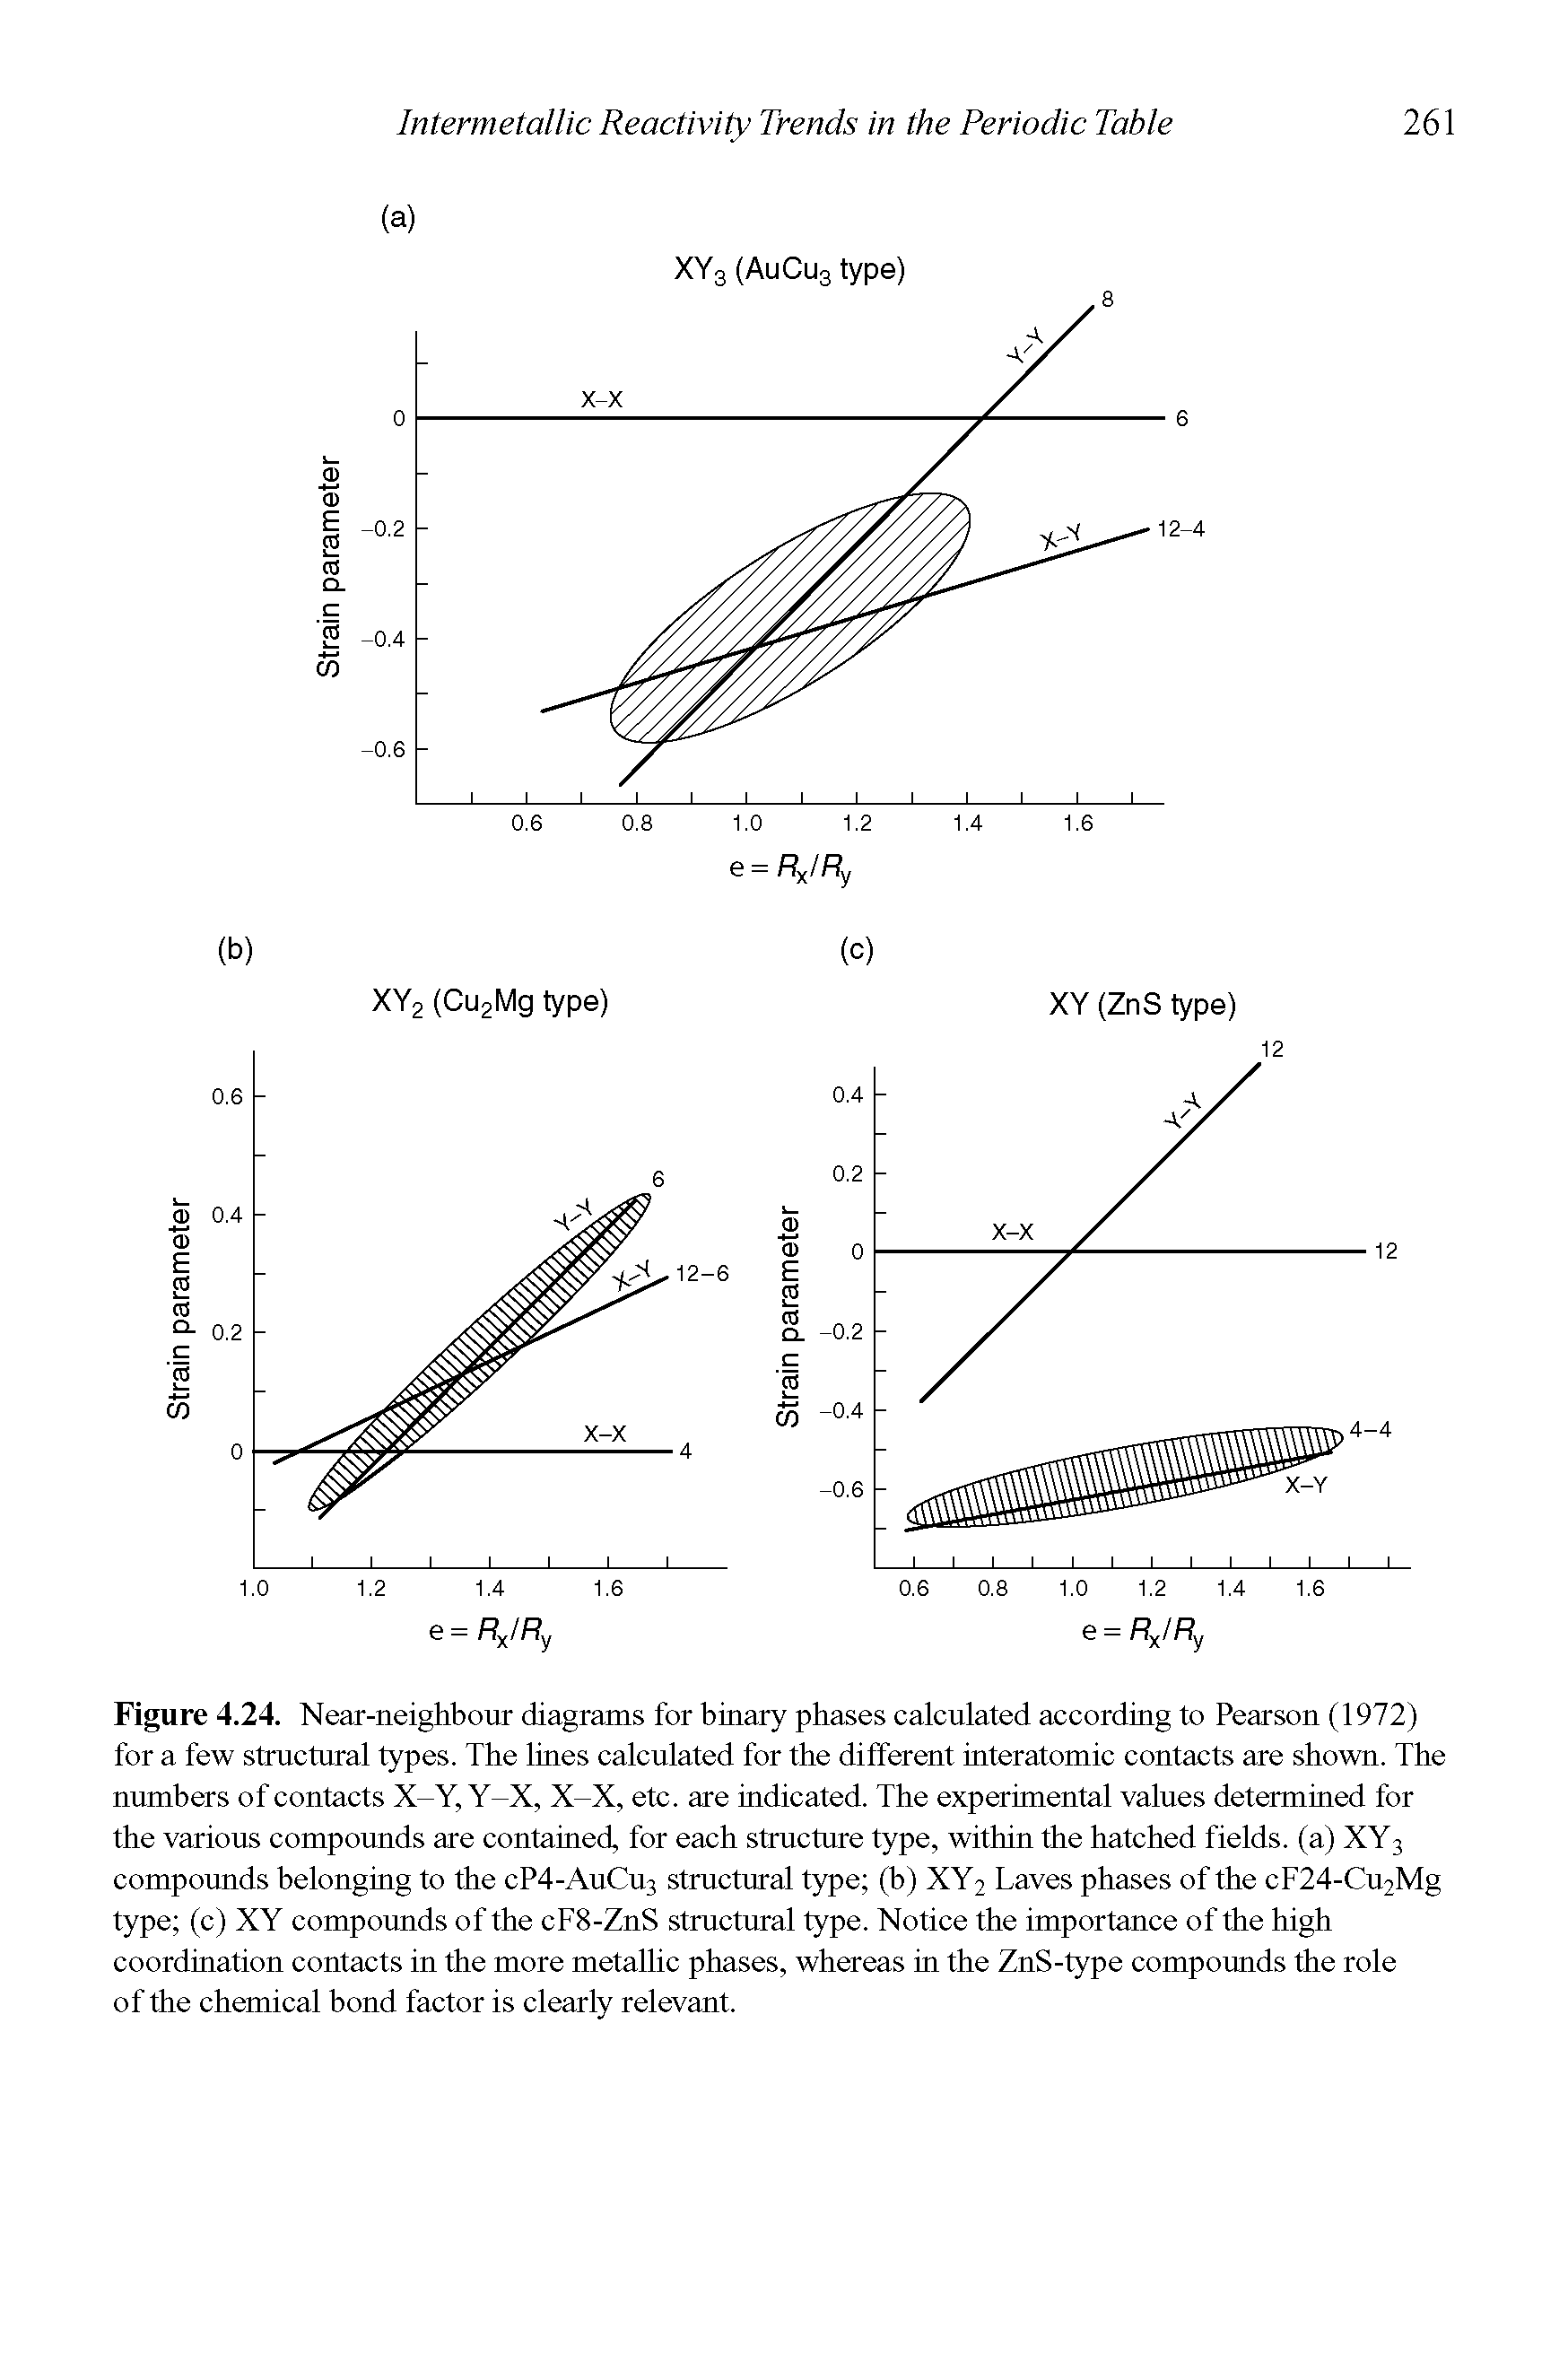 Figure 4.24. Near-neighbour diagrams for binary phases calculated according to Pearson (1972) for a few structural types. The lines calculated for the different interatomic contacts are shown. The numbers of contacts X-Y, Y-X, X-X, etc. are indicated. The experimental values determined for the various compounds are contained, for each structure type, within the hatched fields, (a) XY3 compounds belonging to the cP4-AuCu3 structural type (b) XY2 Taves phases of the cF24-Cu2Mg type (c) XY compounds of the cF8-ZnS structural type. Notice the importance of the high coordination contacts in the more metallic phases, whereas in the ZnS-type compounds the role of the chemical bond factor is clearly relevant.